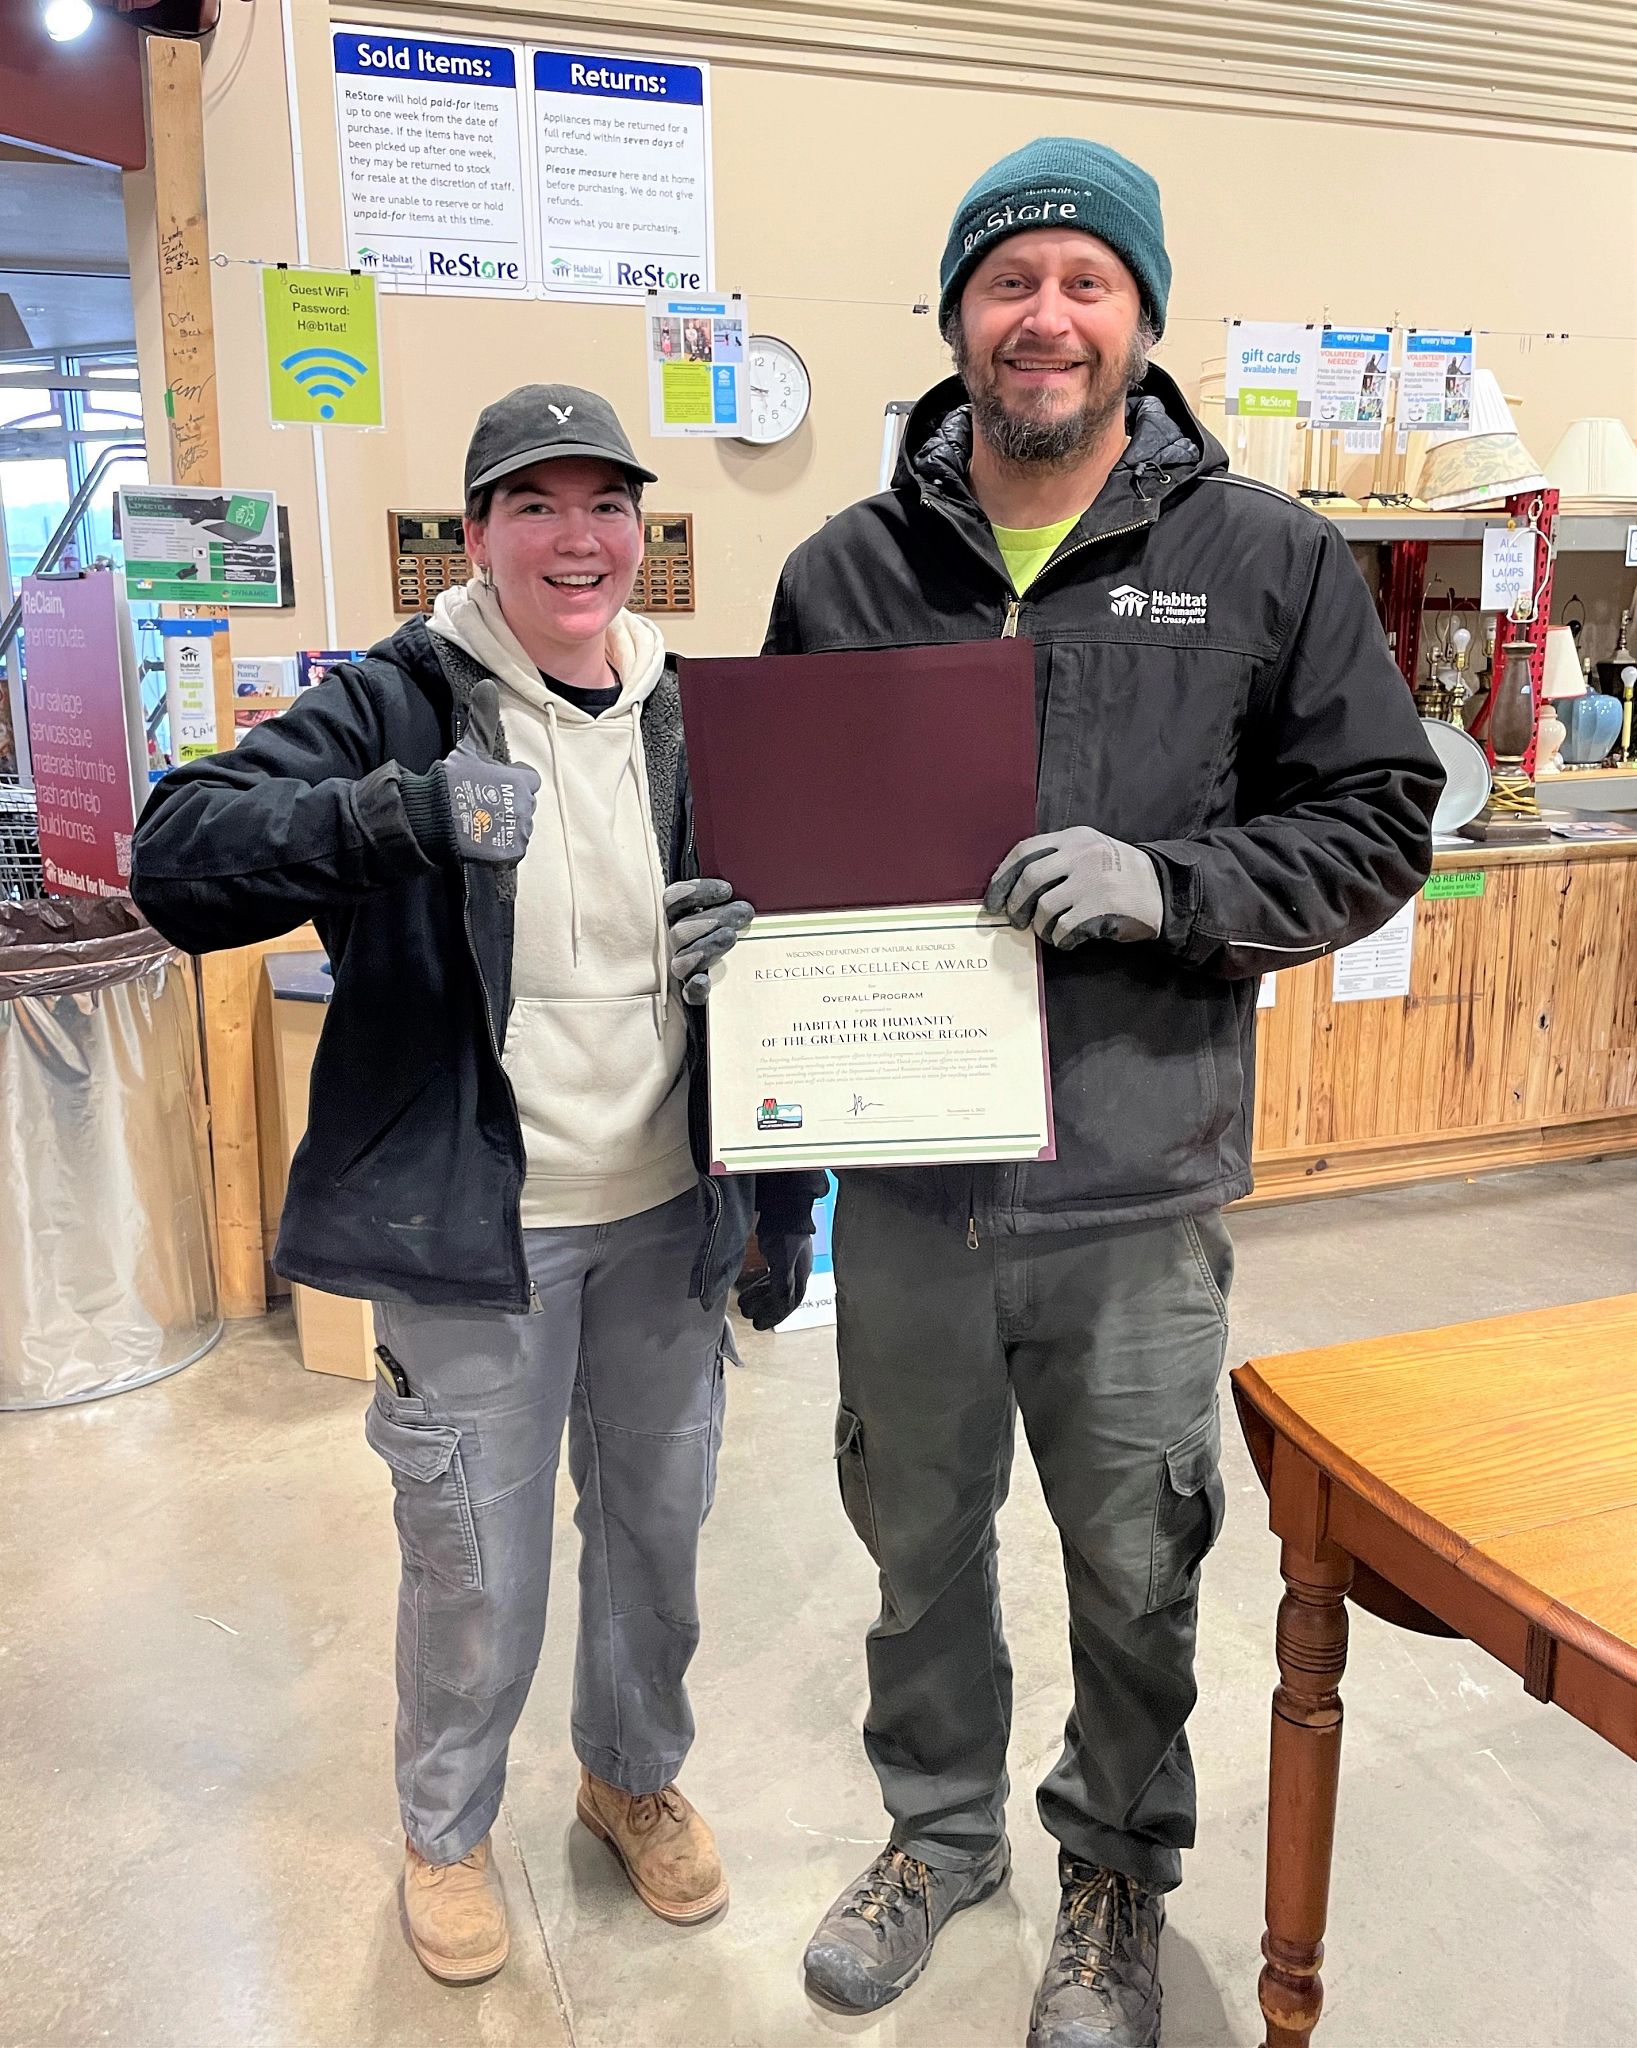 Two team members from Habitat for Humanity of the Greater La Crosse Region pose in a Habitat ReStore location with their 2023 Wisconsin Recycling Excellence Award certificate from the DNR. One team member offers a 'thumbs up' sign.